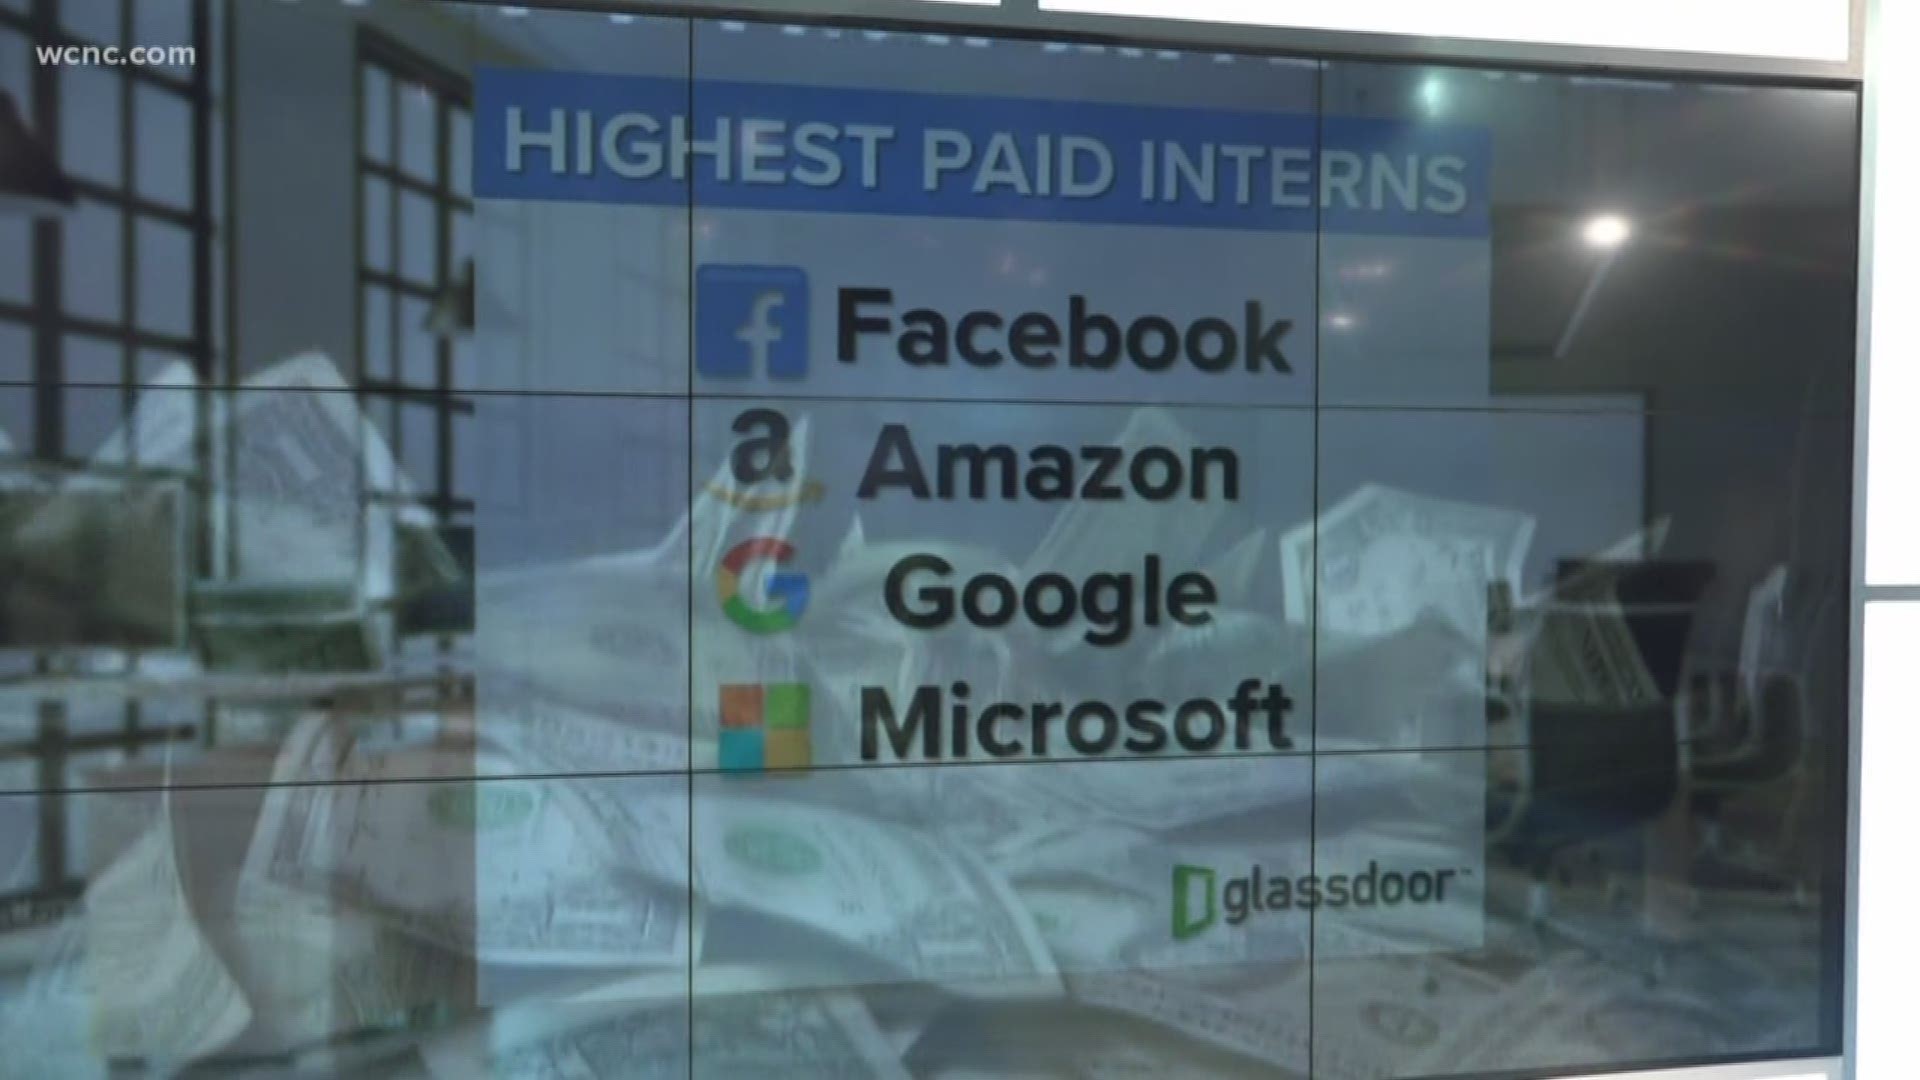 Interns are cashing in for companies like Facebook, Amazon and Google, earning more than double than the average American, according to new data.